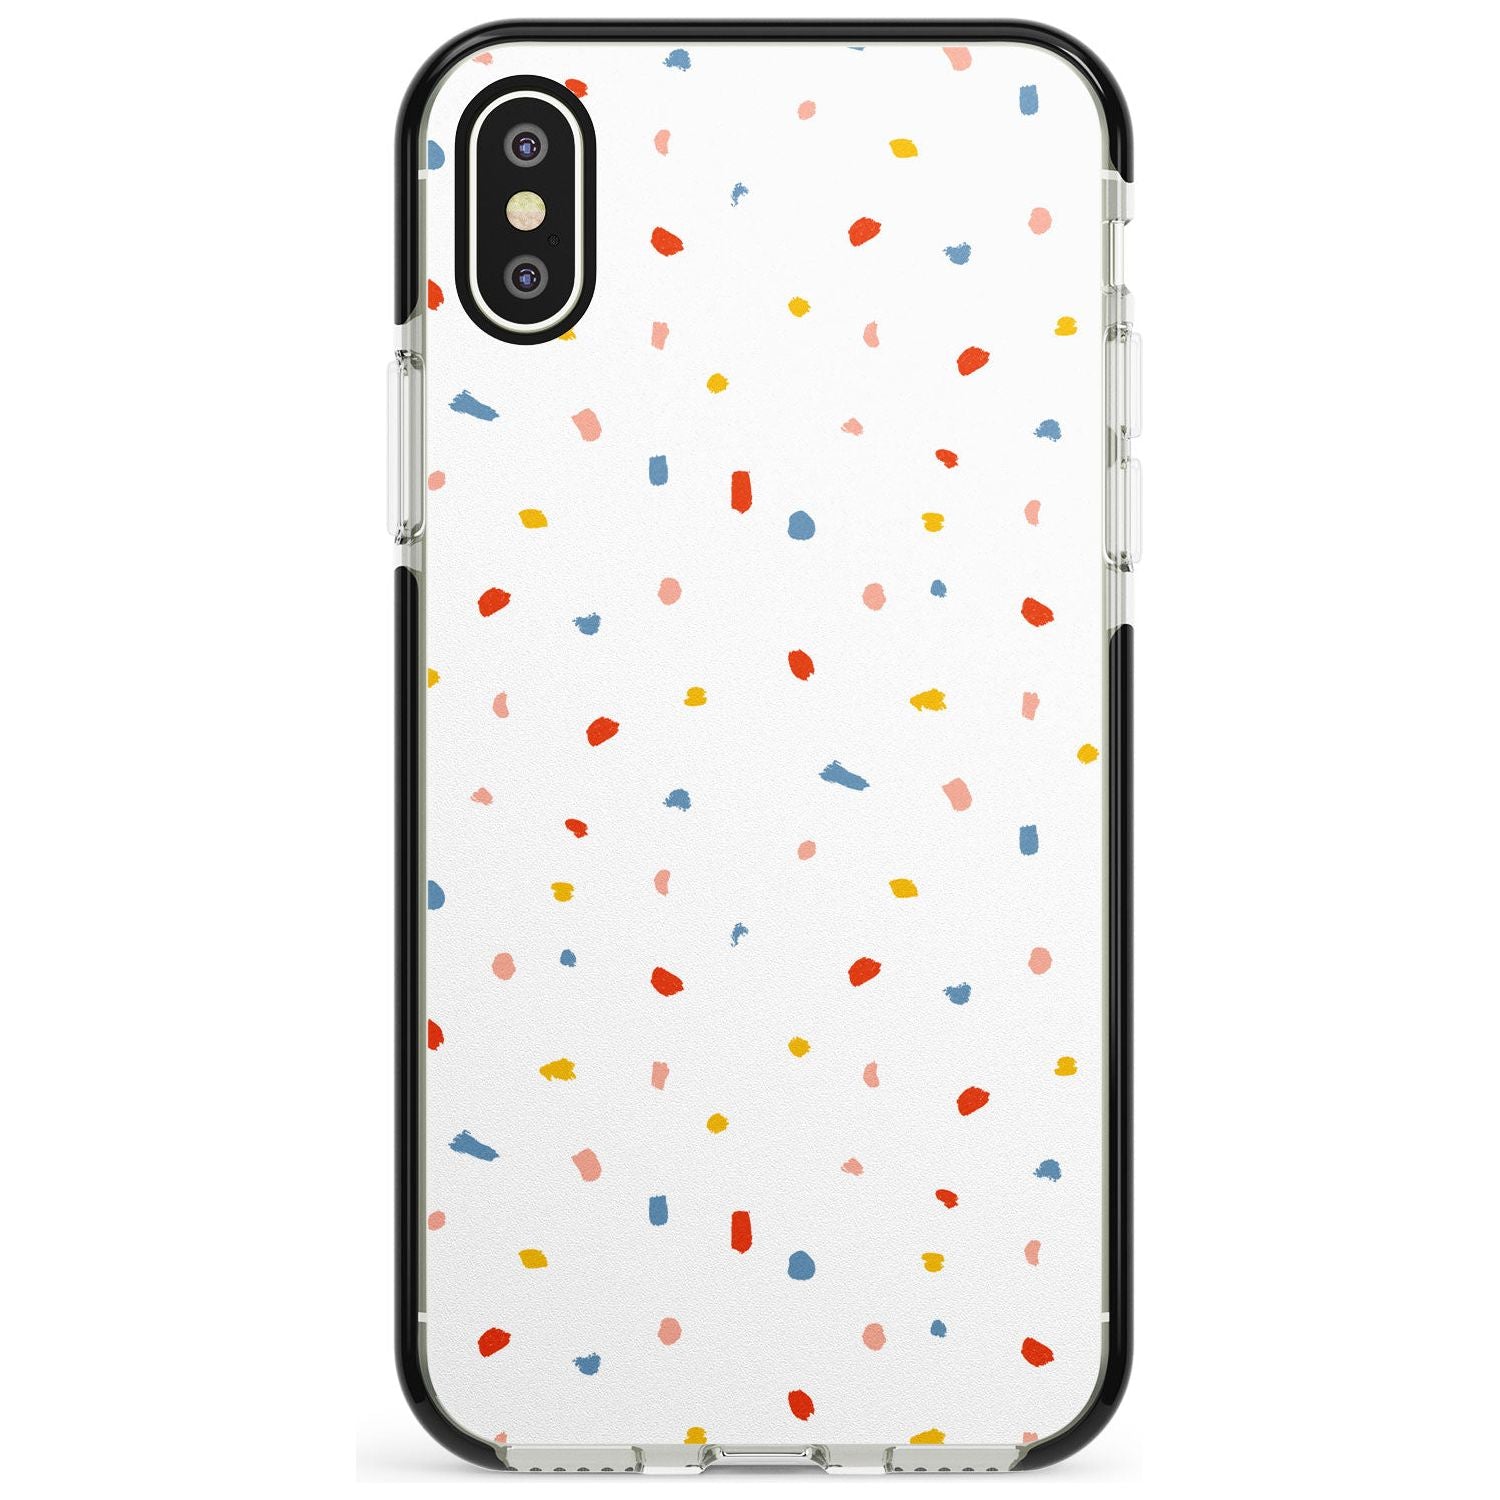 Confetti Print on Solid White Black Impact Phone Case for iPhone X XS Max XR